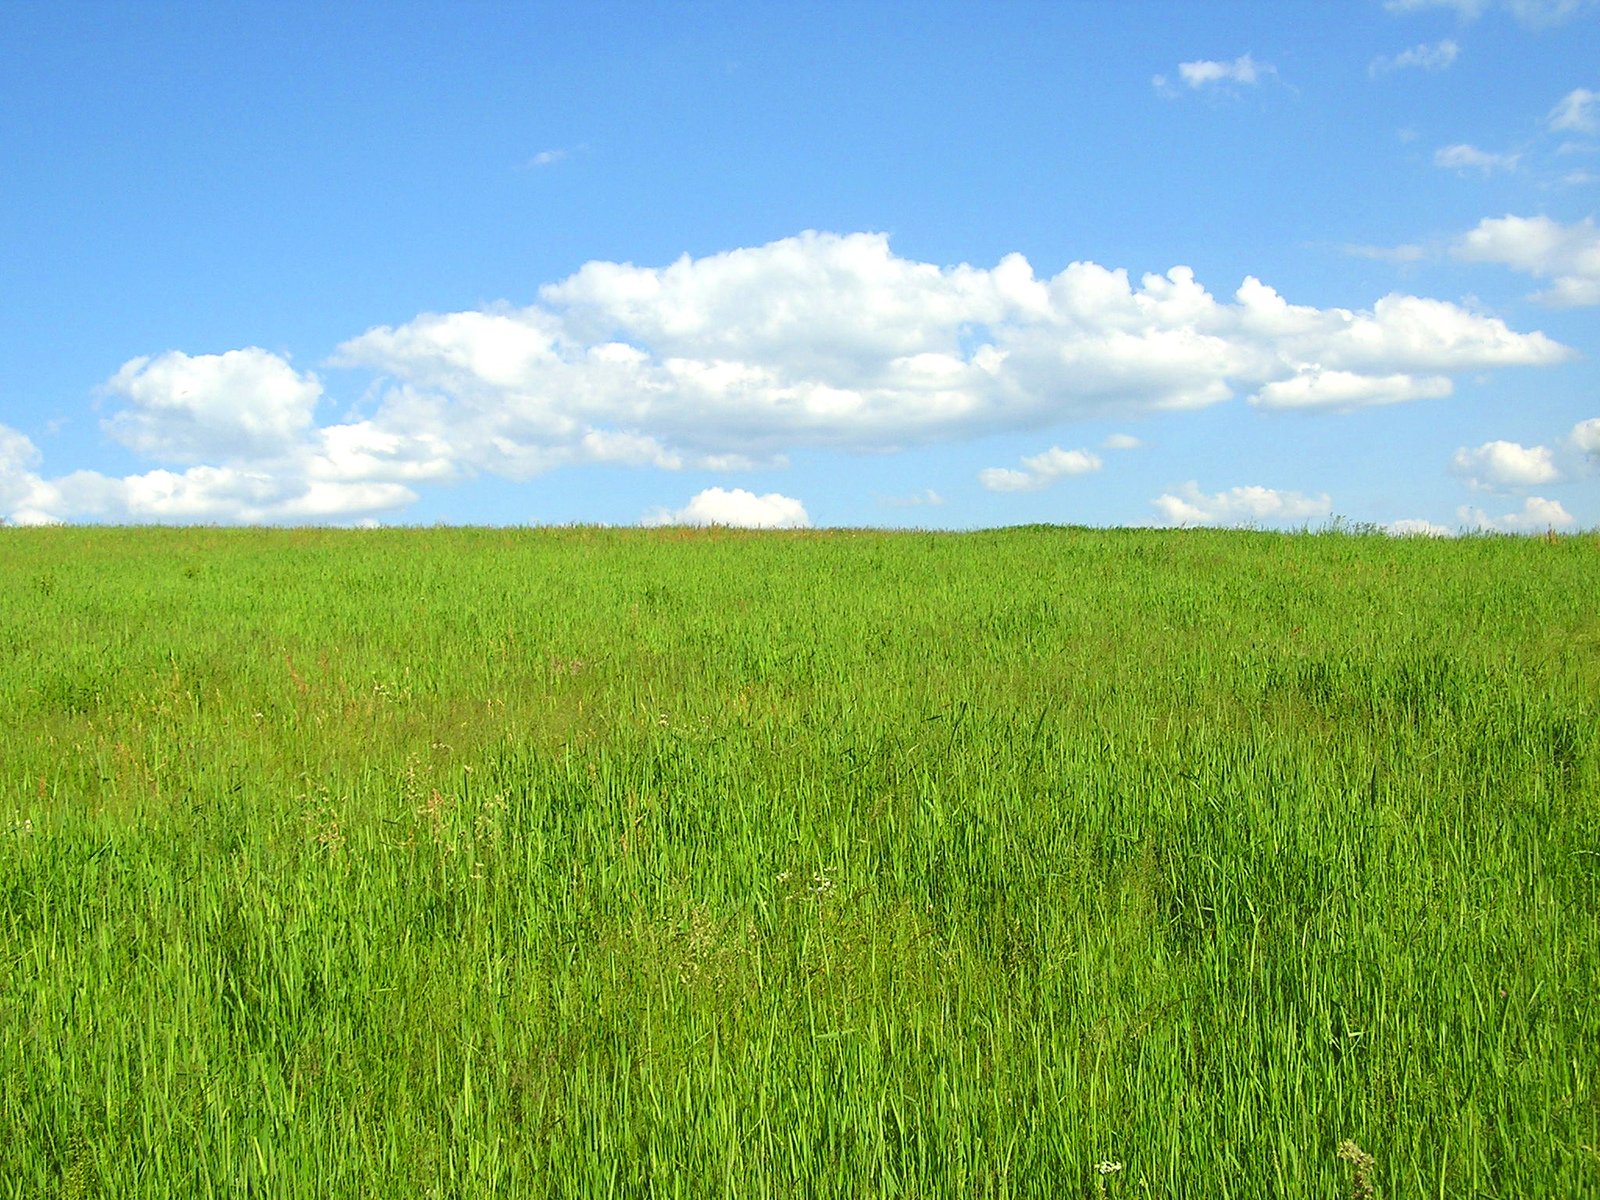 the field is filled with many different types of grass